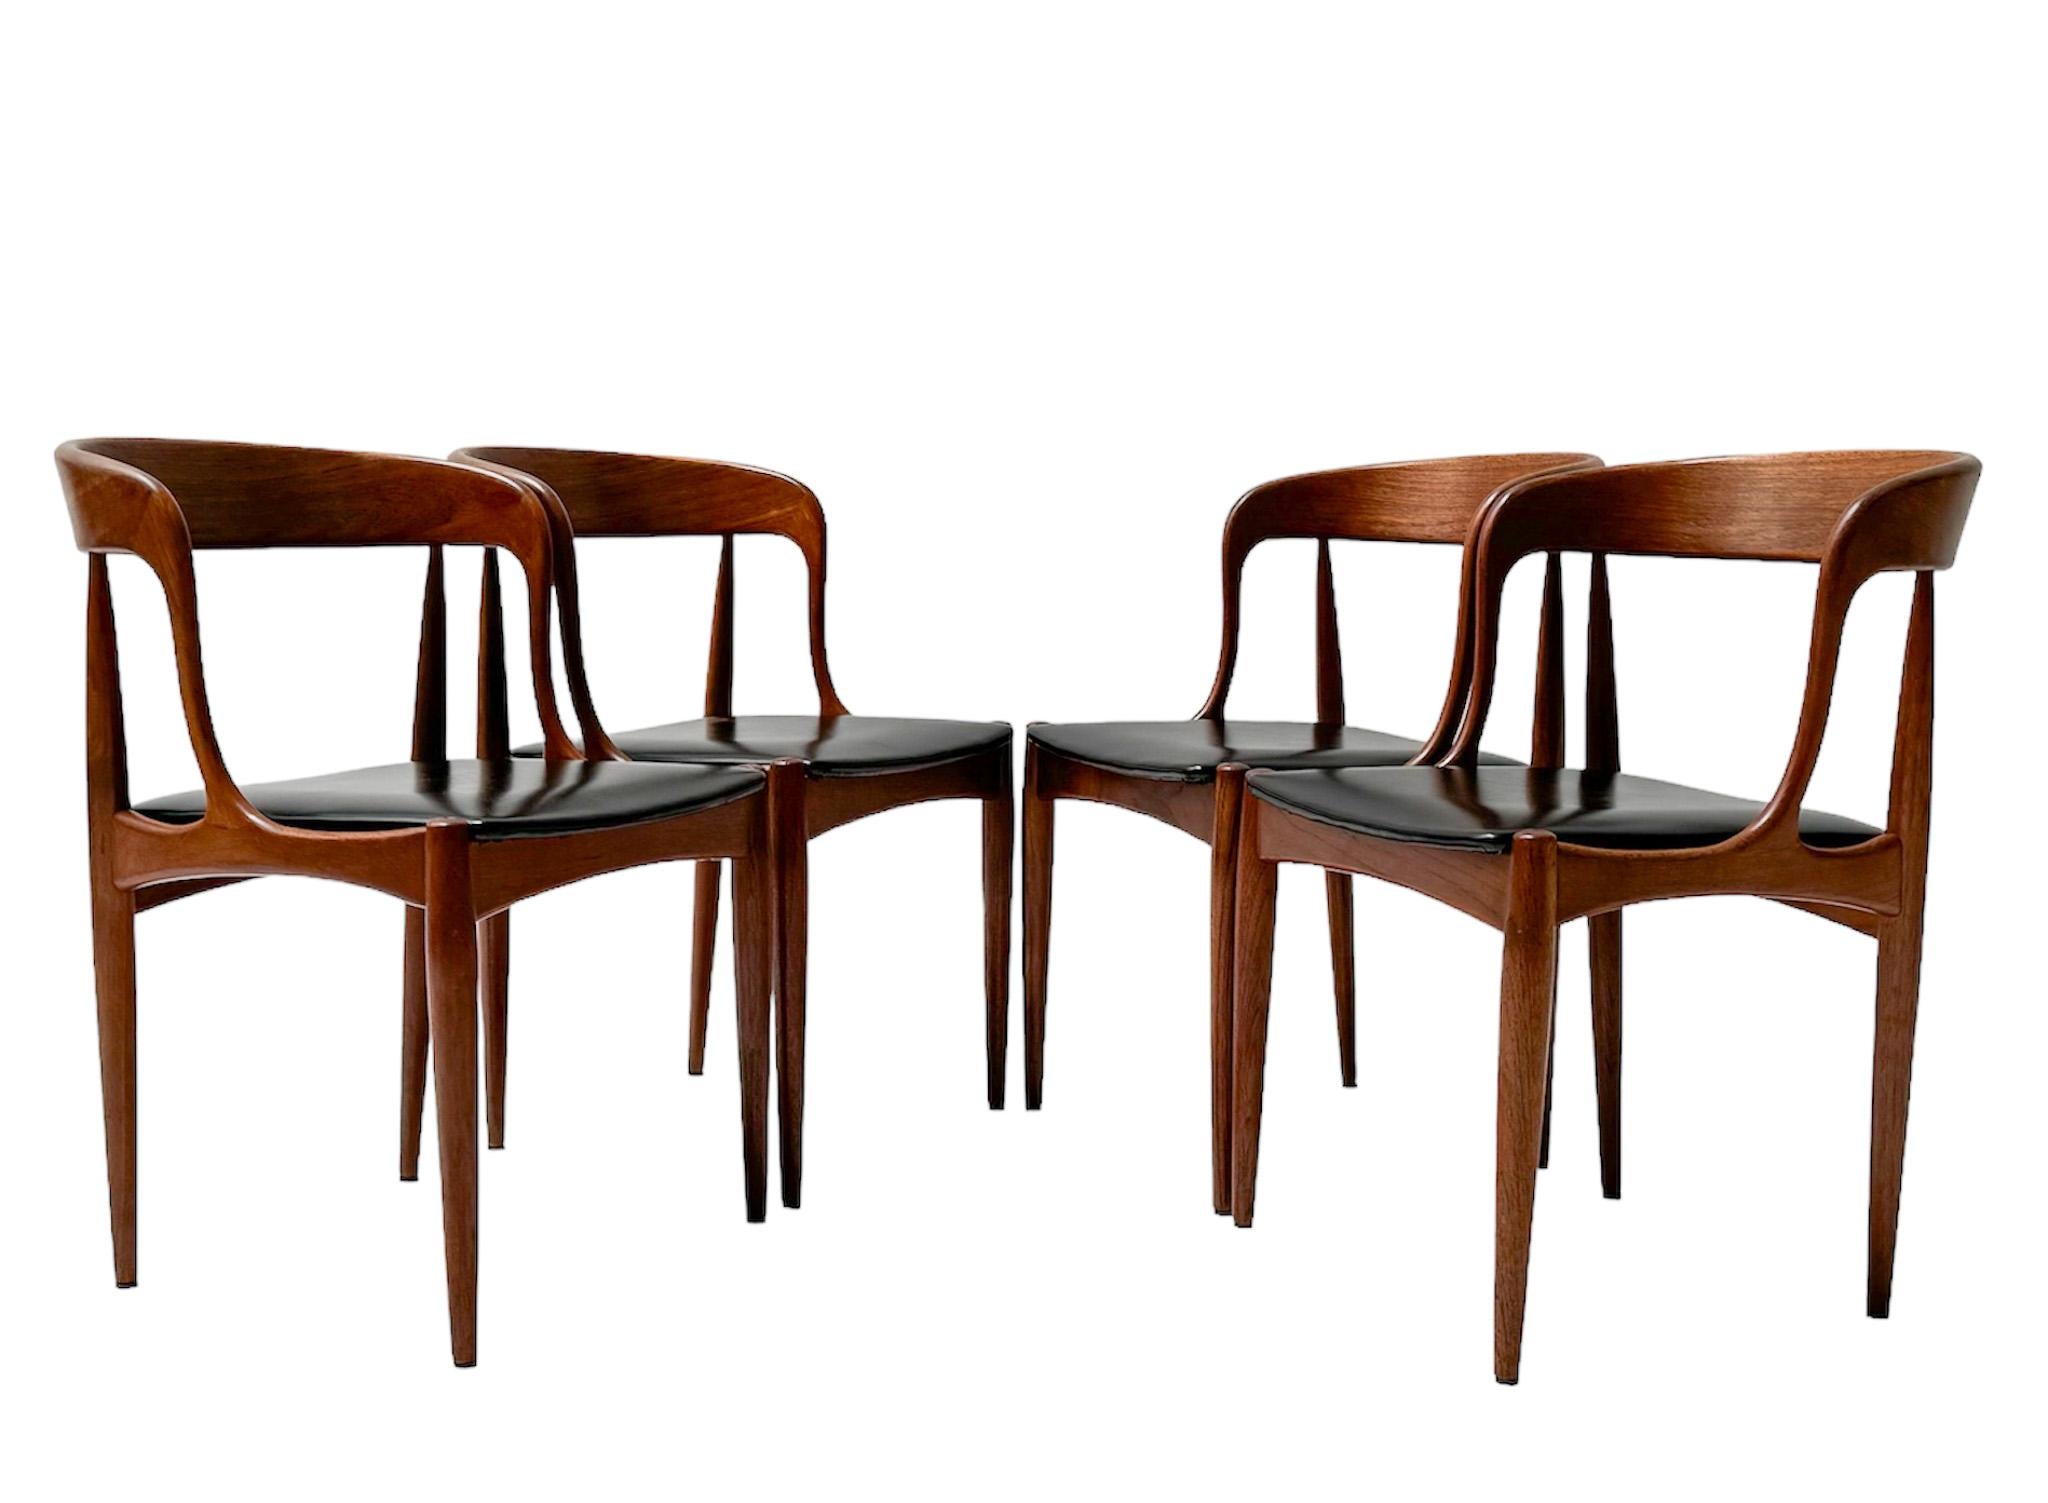 Four Teak Mid-Century Modern Dining Chairs by Johannes Andersen for Uldum, 1960s In Good Condition For Sale In Amsterdam, NL